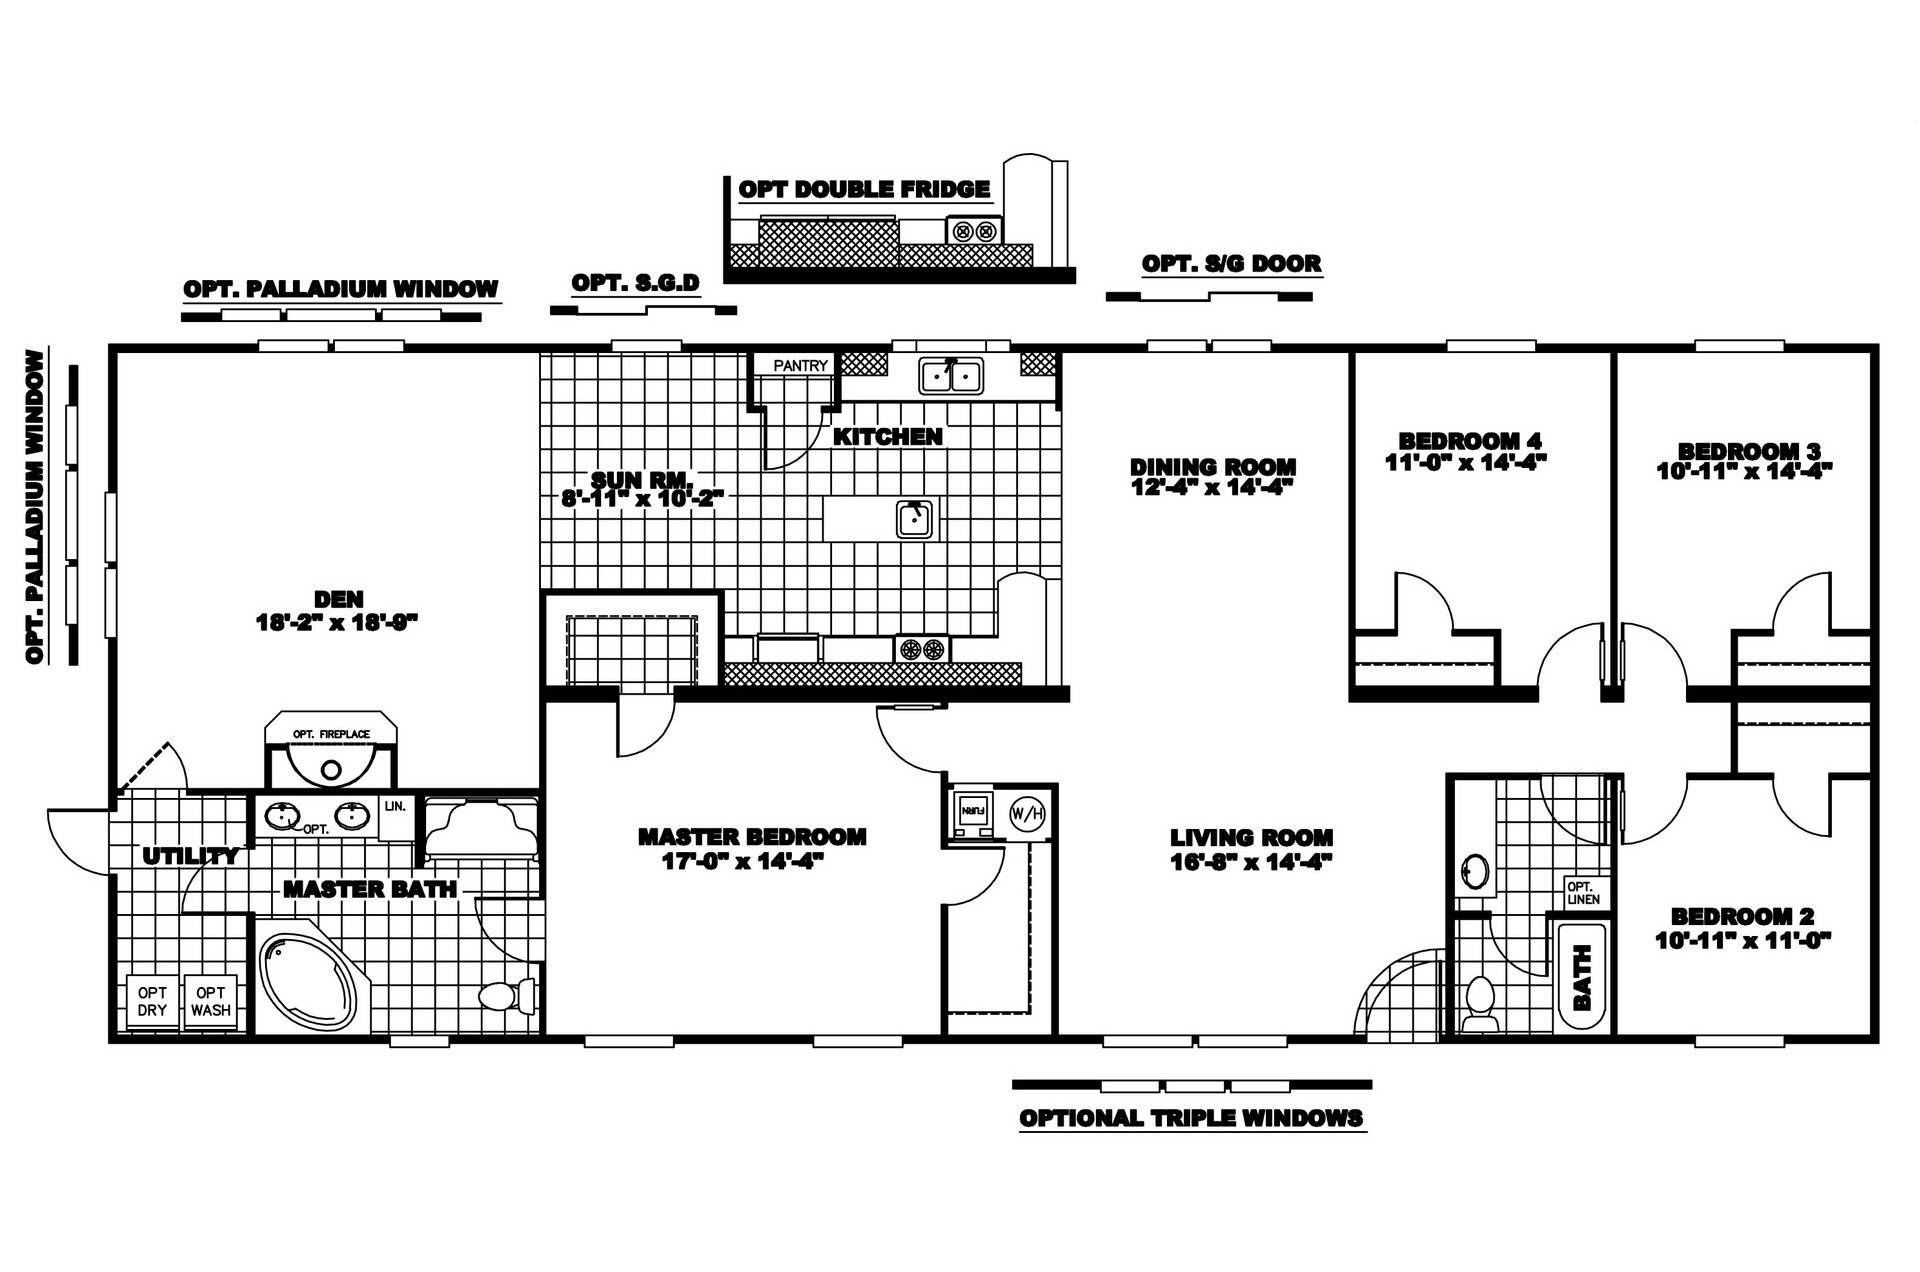 Clayton Mobile Homes Floor Plans And Prices floorplans.click